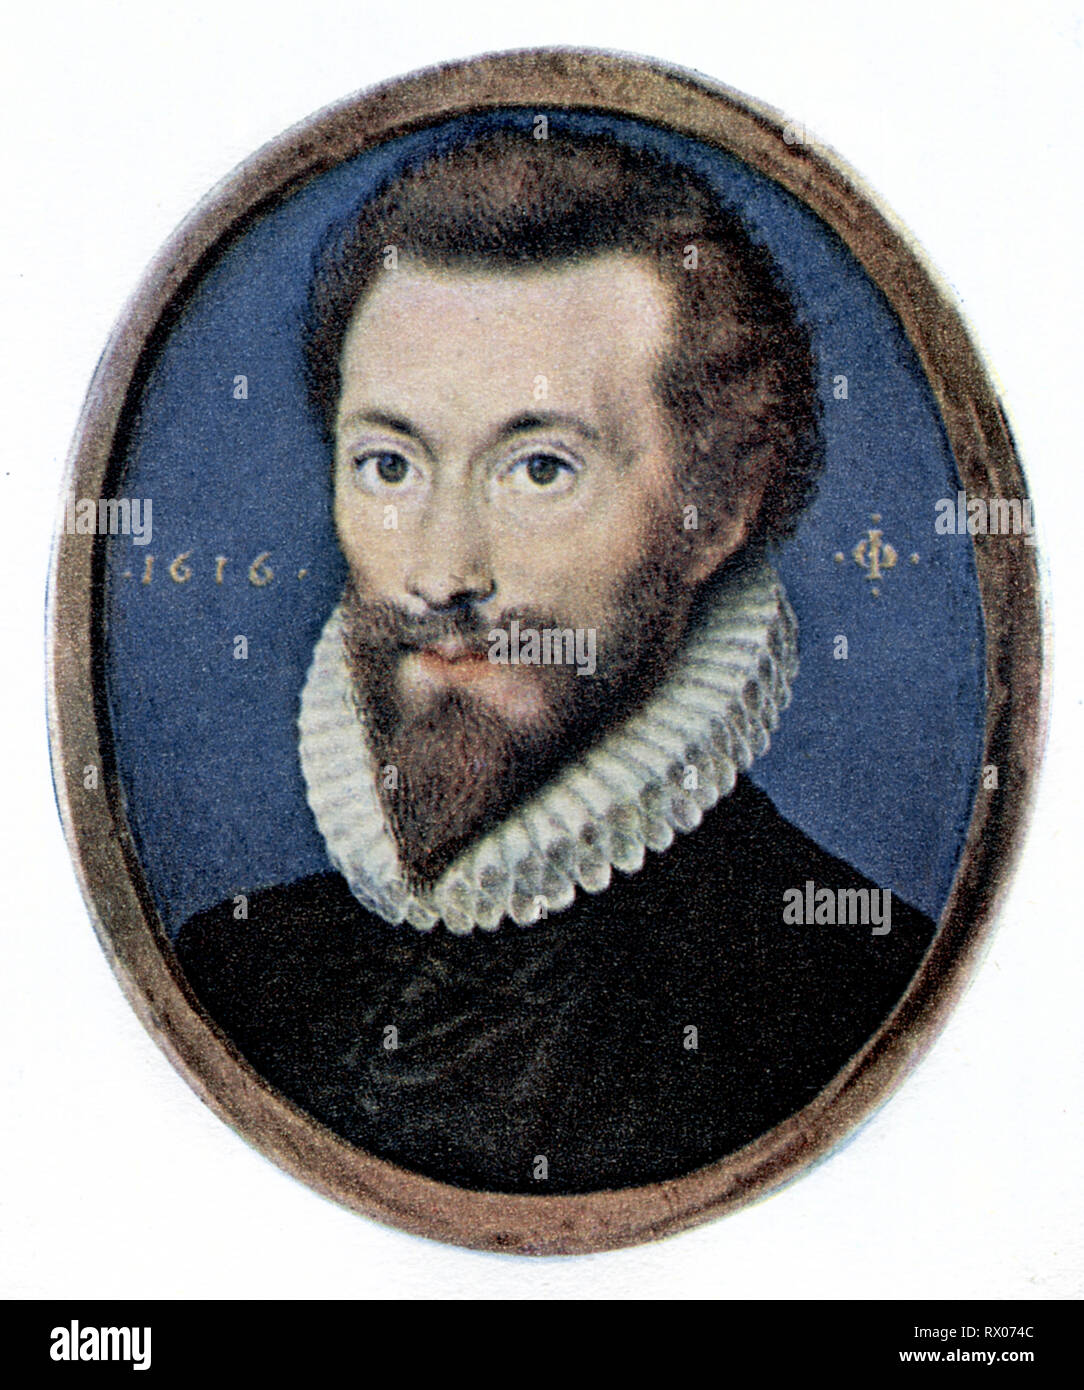 John Donne (1573-1631), 1616. By Isaac Oliver (c1565-1617). John Donne (1572-1631), English poet and Church of England cleric. Stock Photo